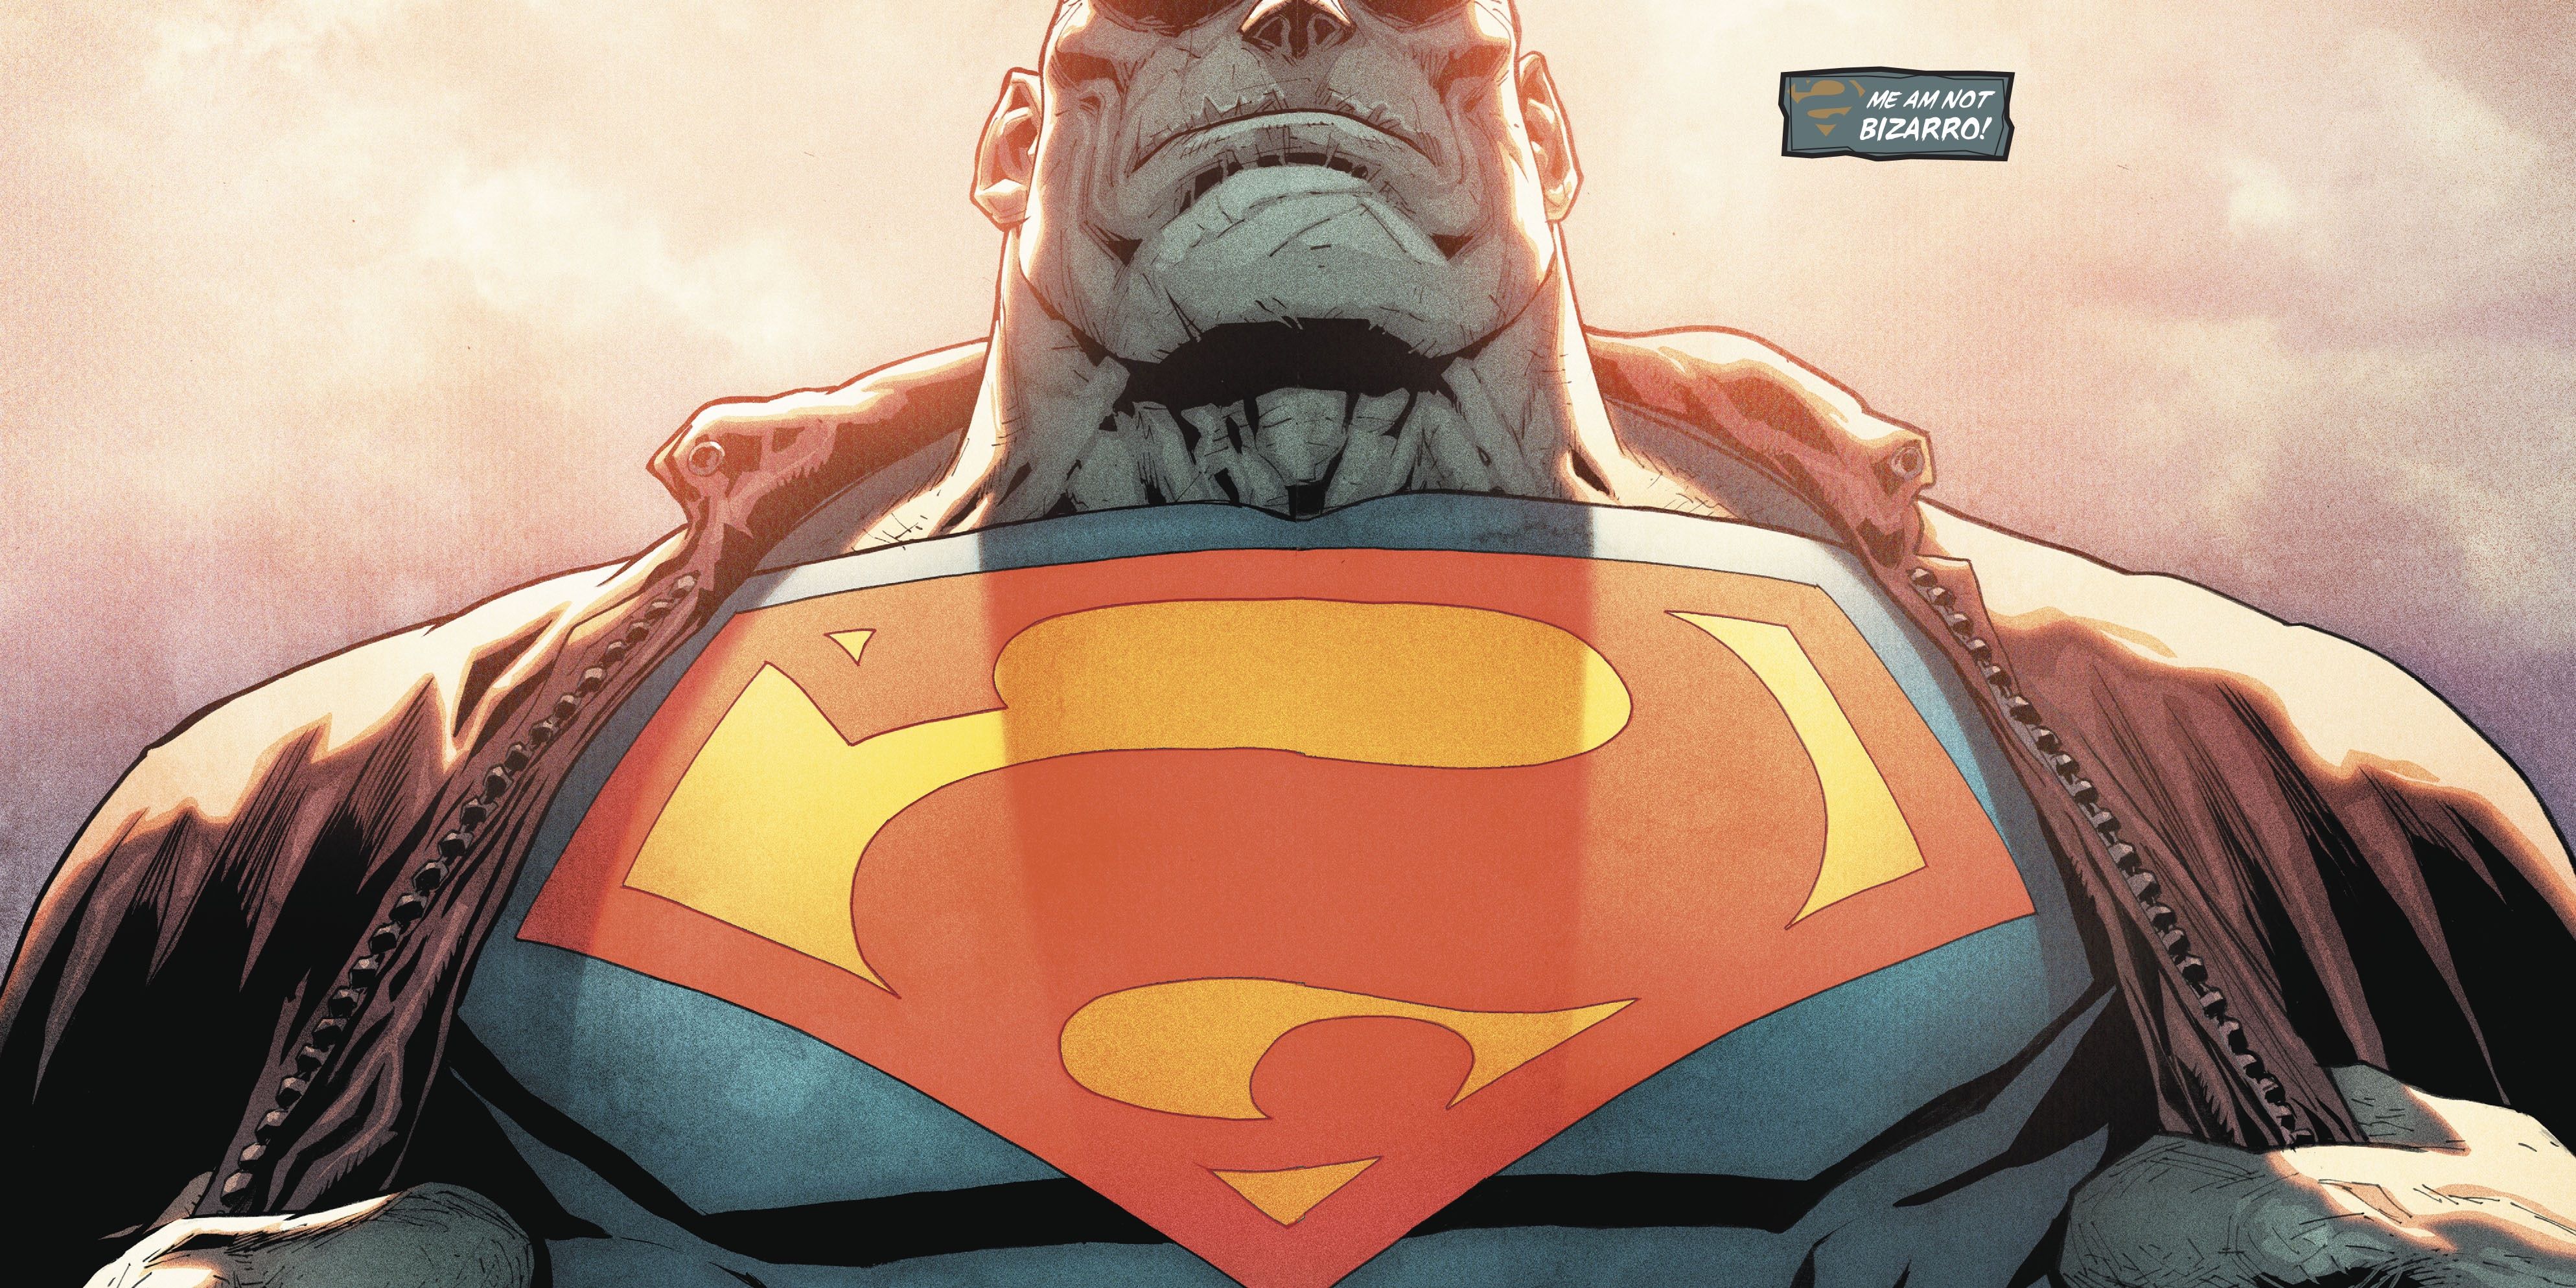 Superman becomes more powerful from Blue Kryptonite in the DC comics